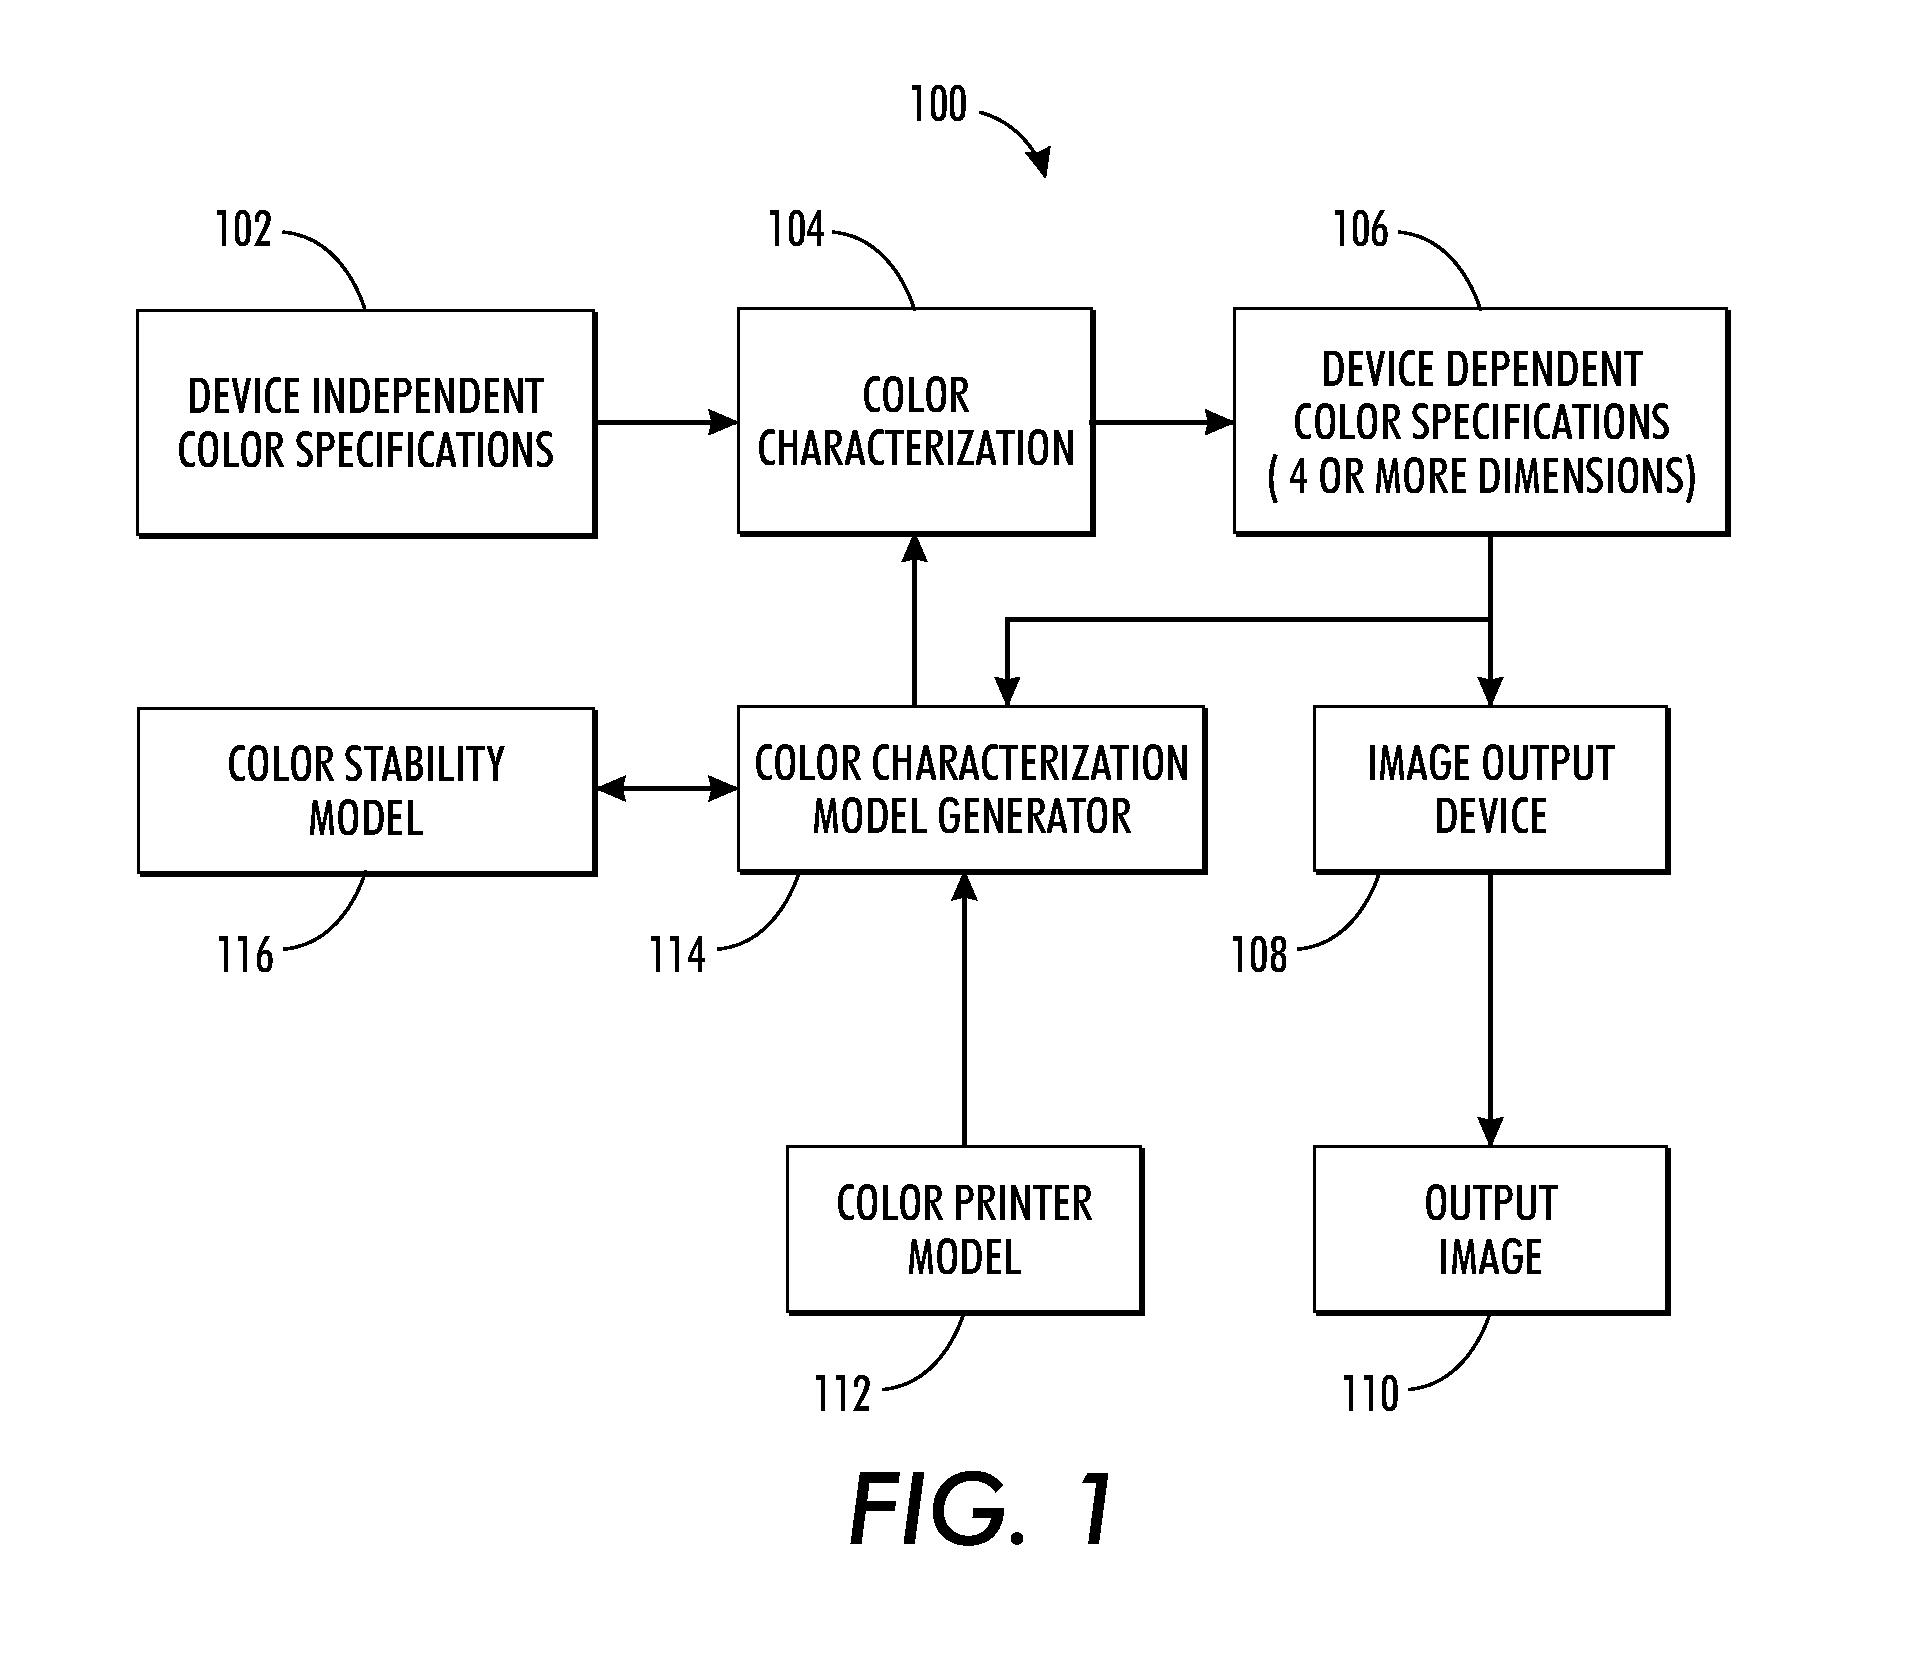 Color mapping determination for an N-color marking device based upon color stability